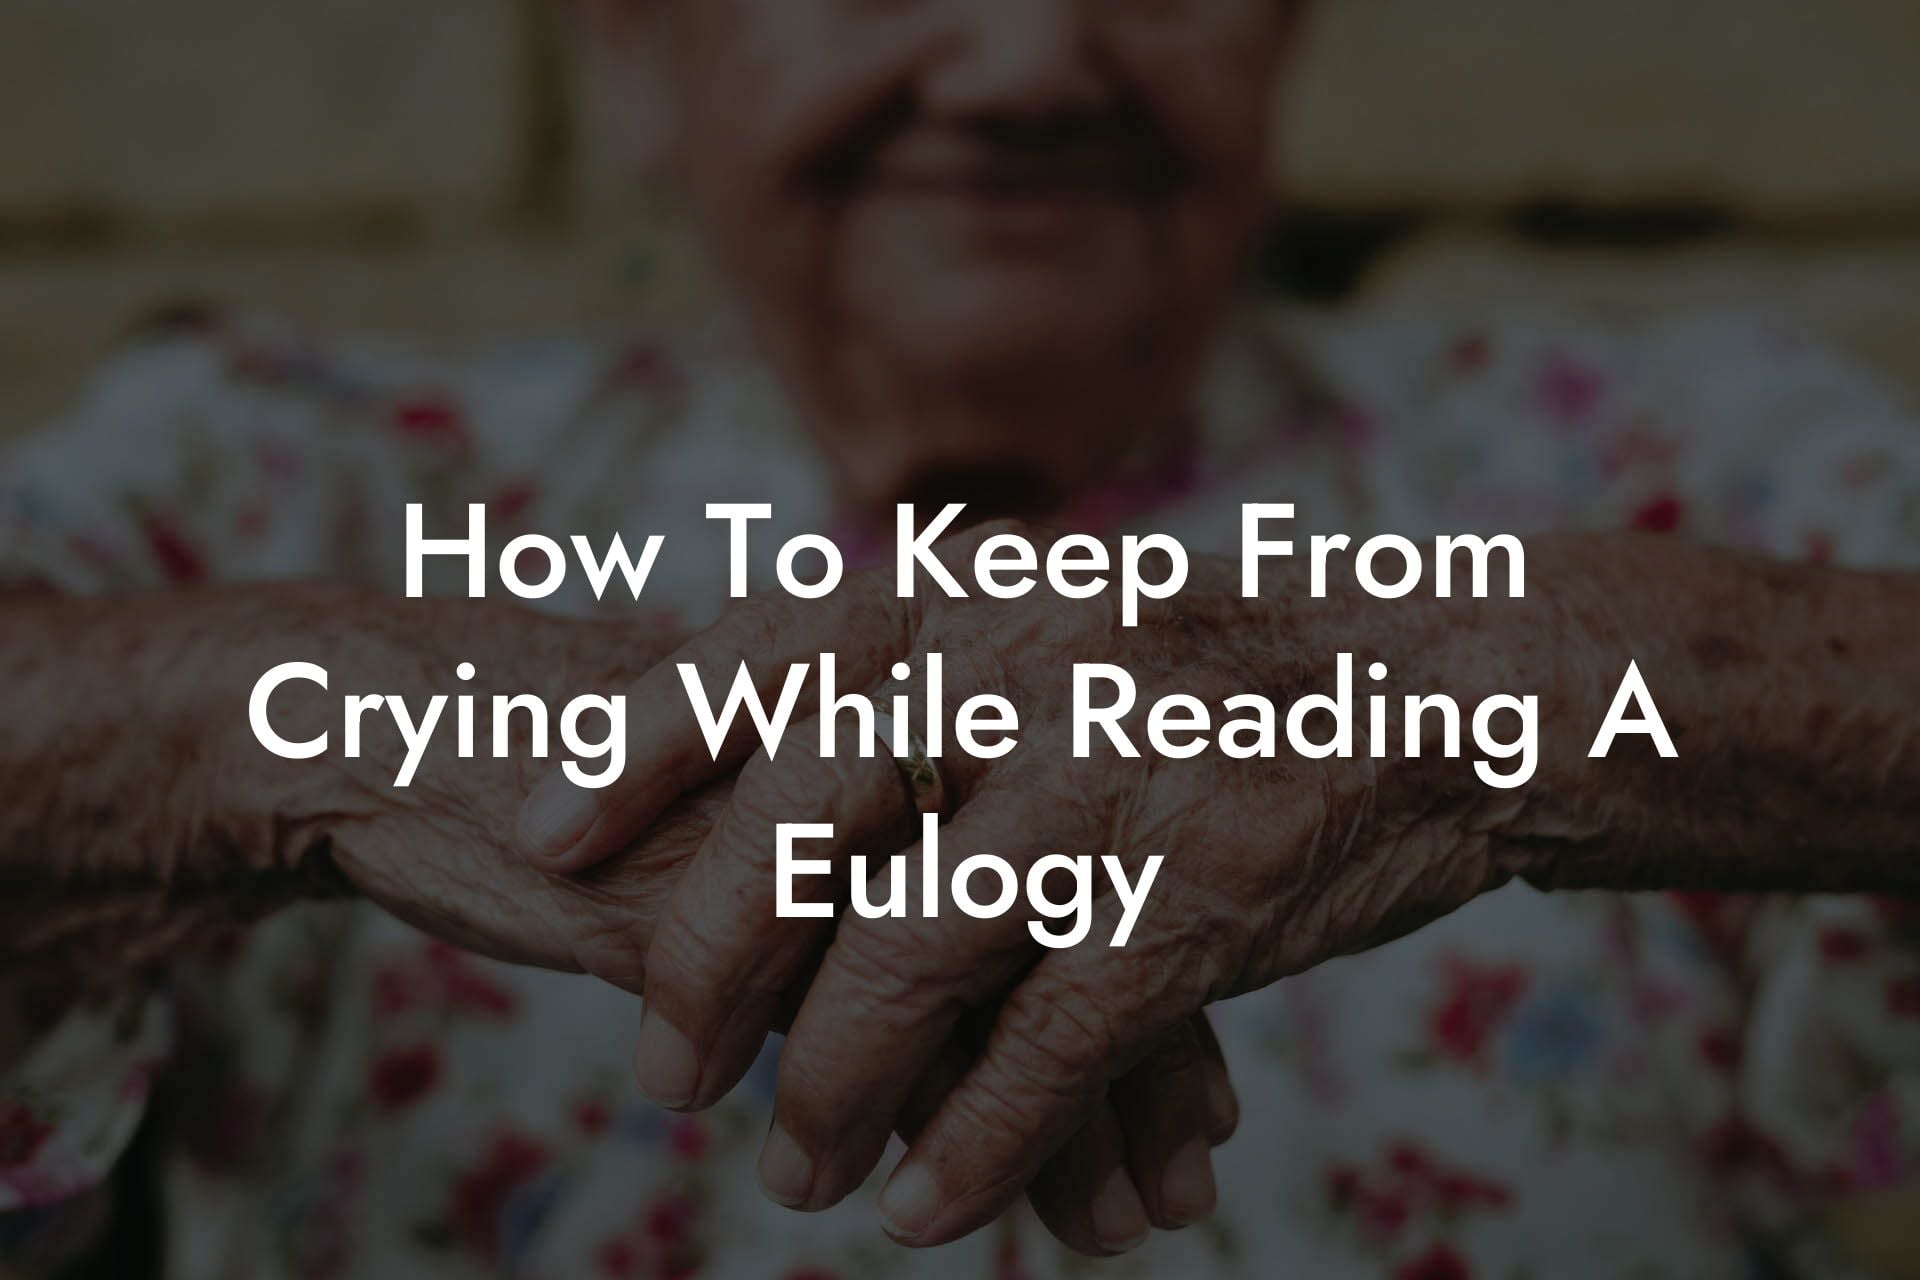 How To Keep From Crying While Reading A Eulogy